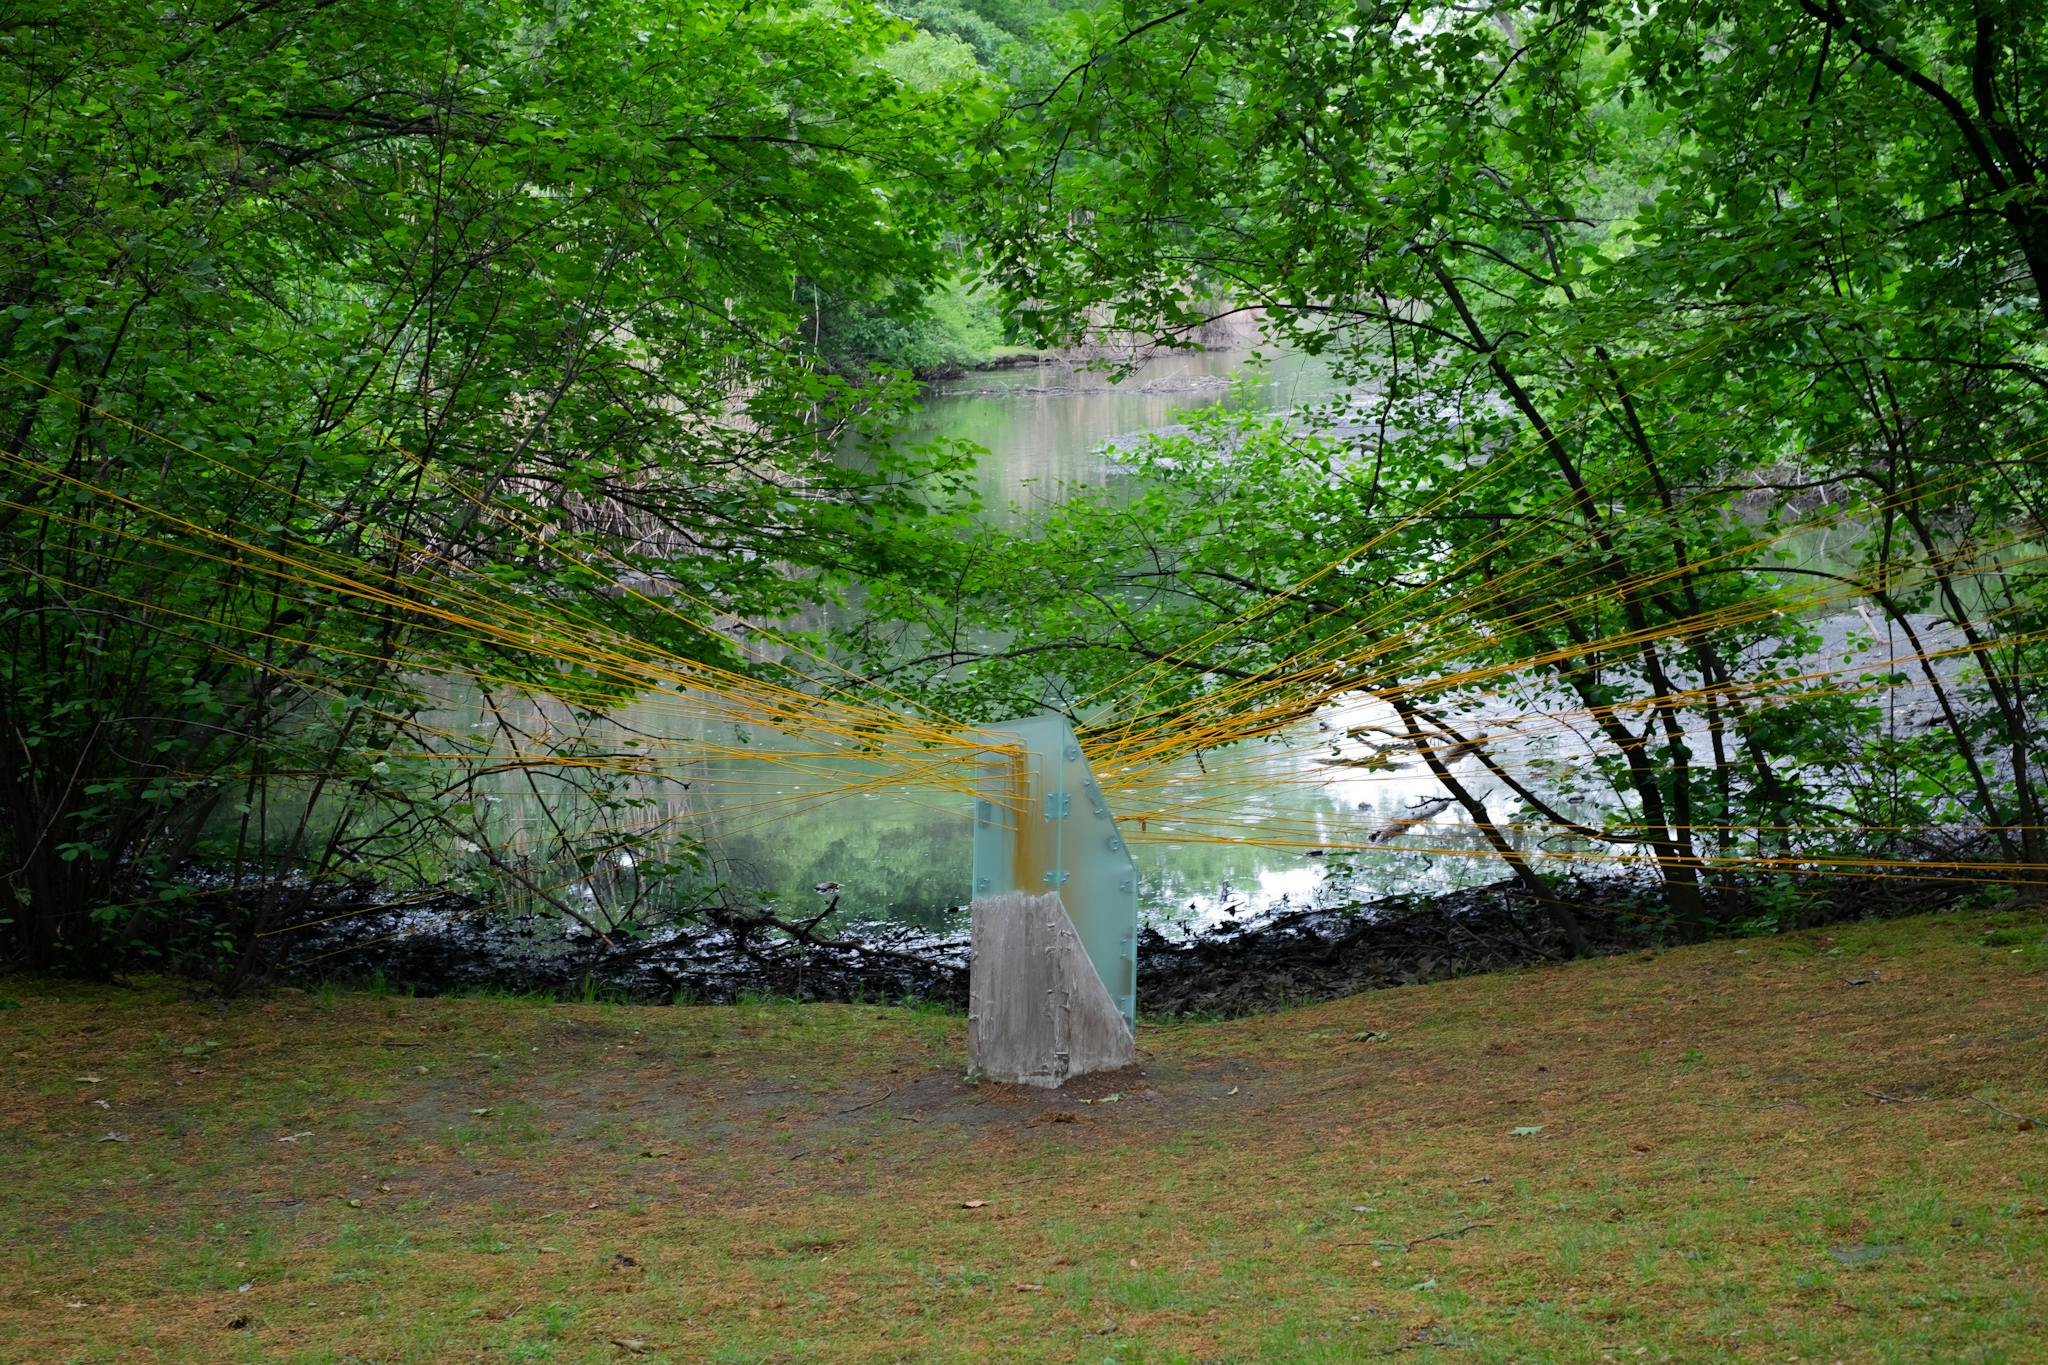 An installation emerges in an outdoor scene of a lush forest with a pond.